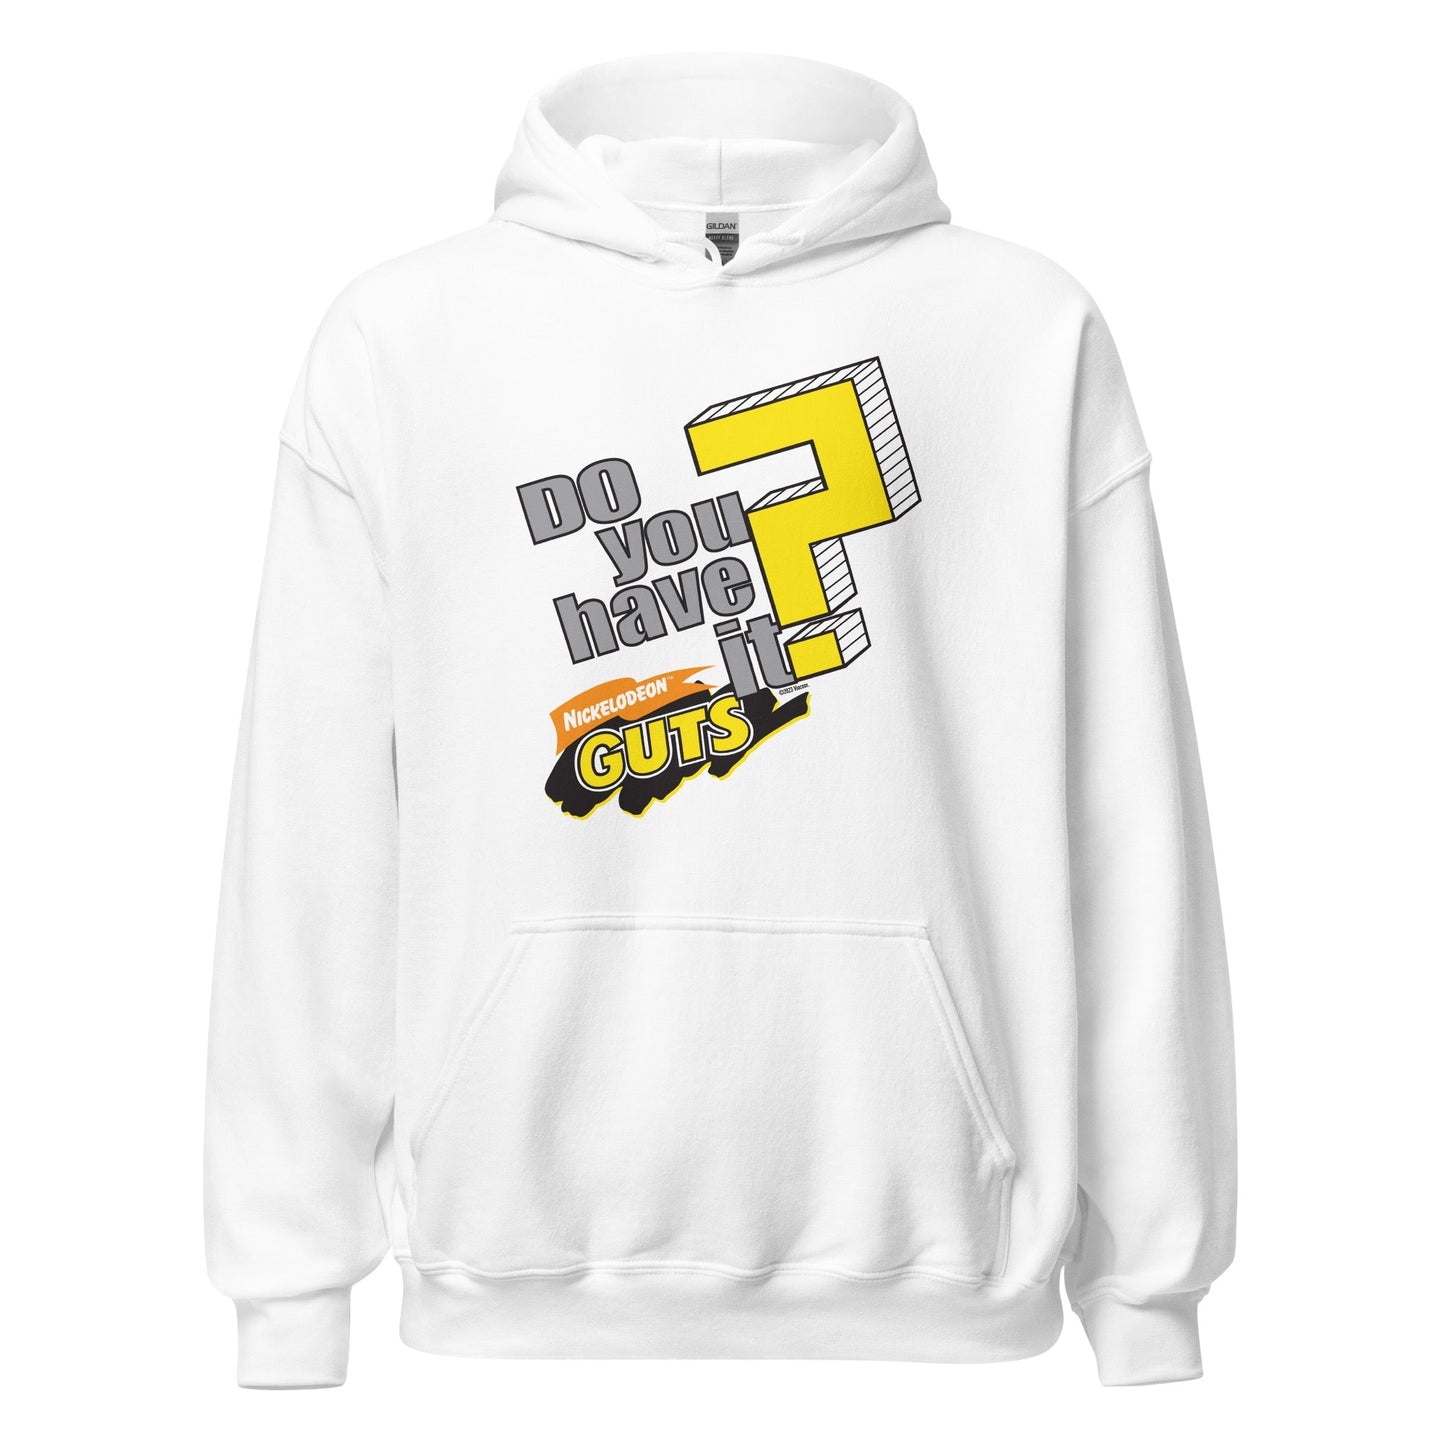 Guts Do You Have Hooded Sweatshirt - Paramount Shop